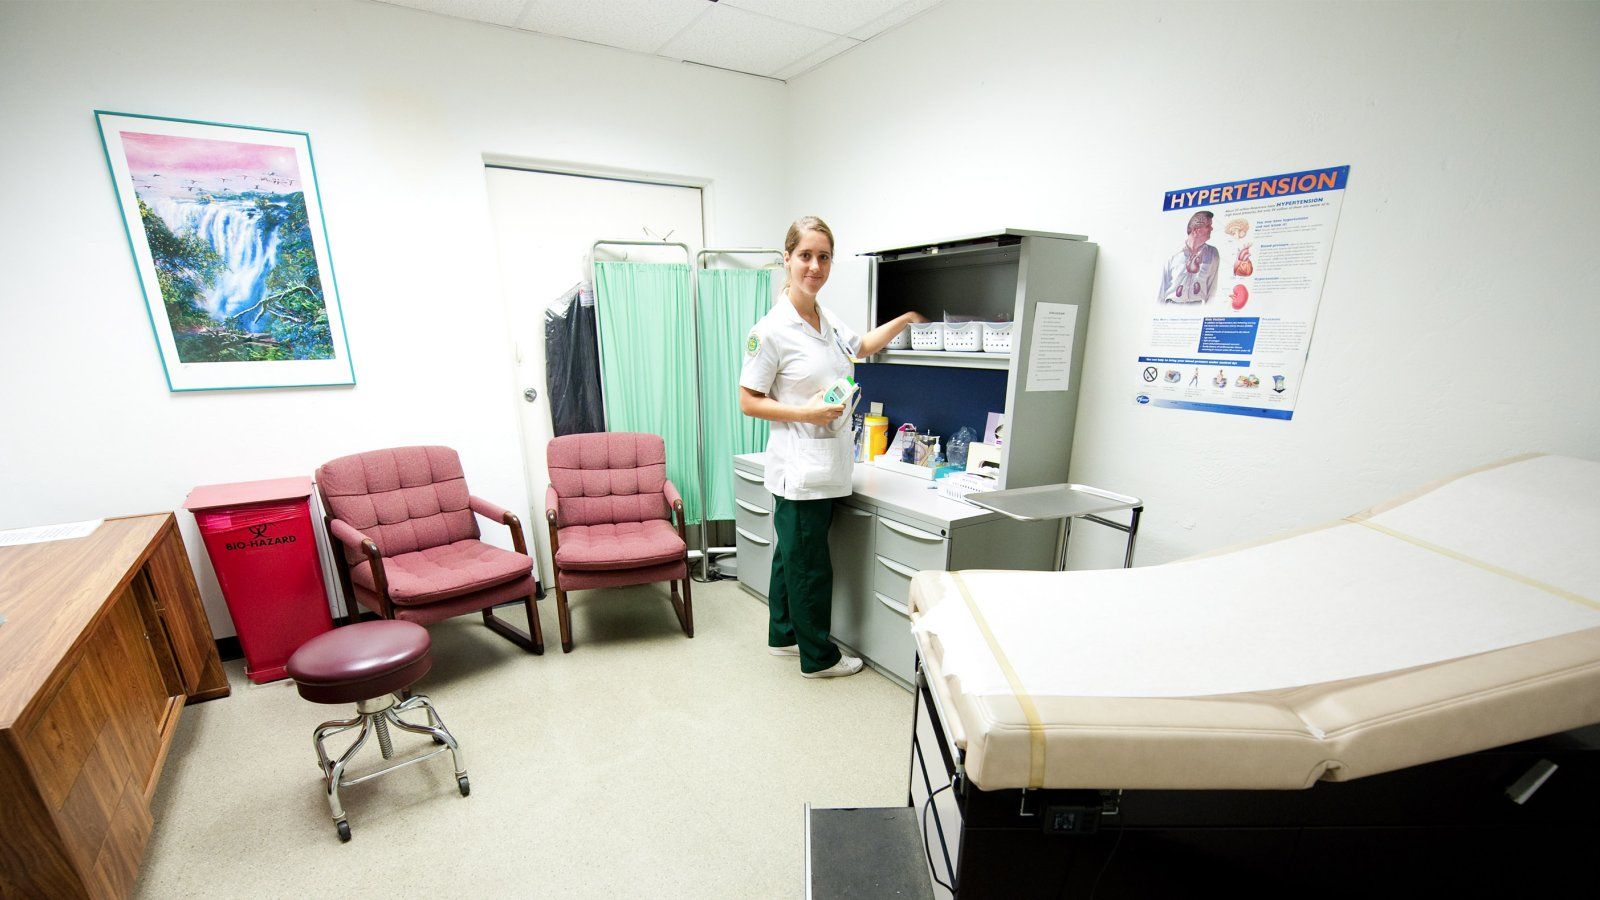 A PLNU nursing student checks supplies in a patient waiting room at the Health Promotion Center.